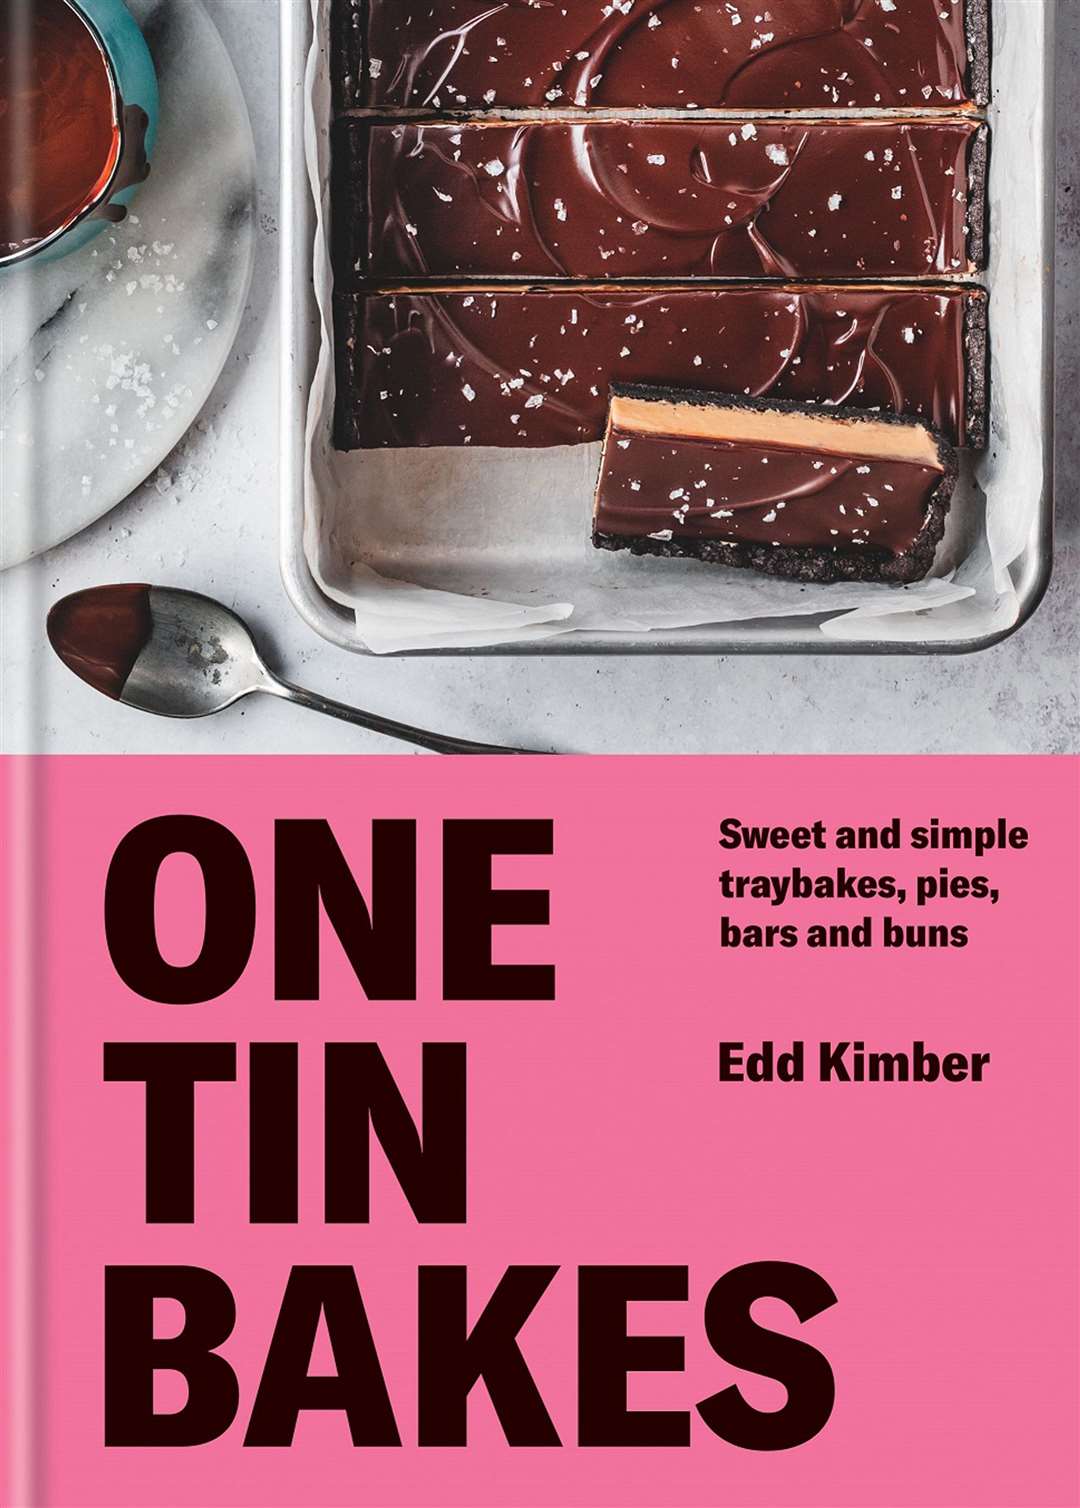 One Tin Bakes by Edd Kimber (published by Kyle Books).